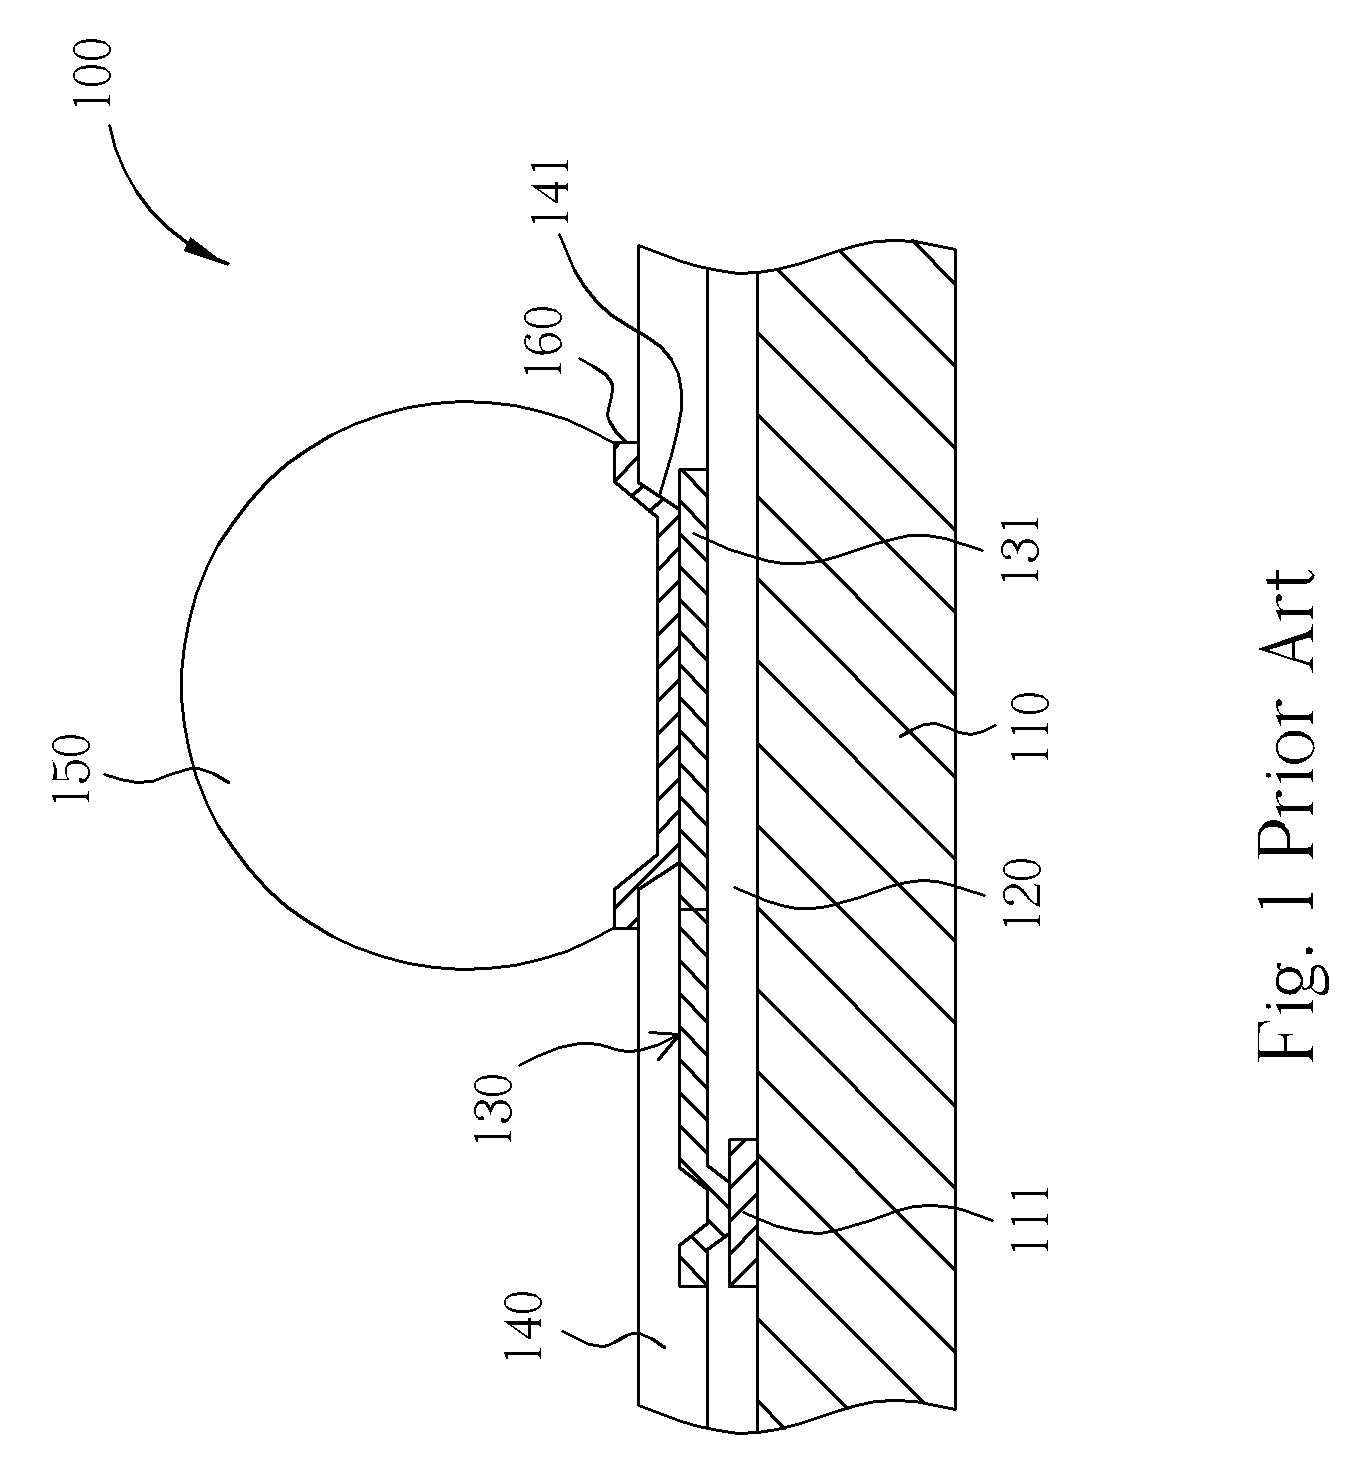 Redistribution connecting structure of solder balls